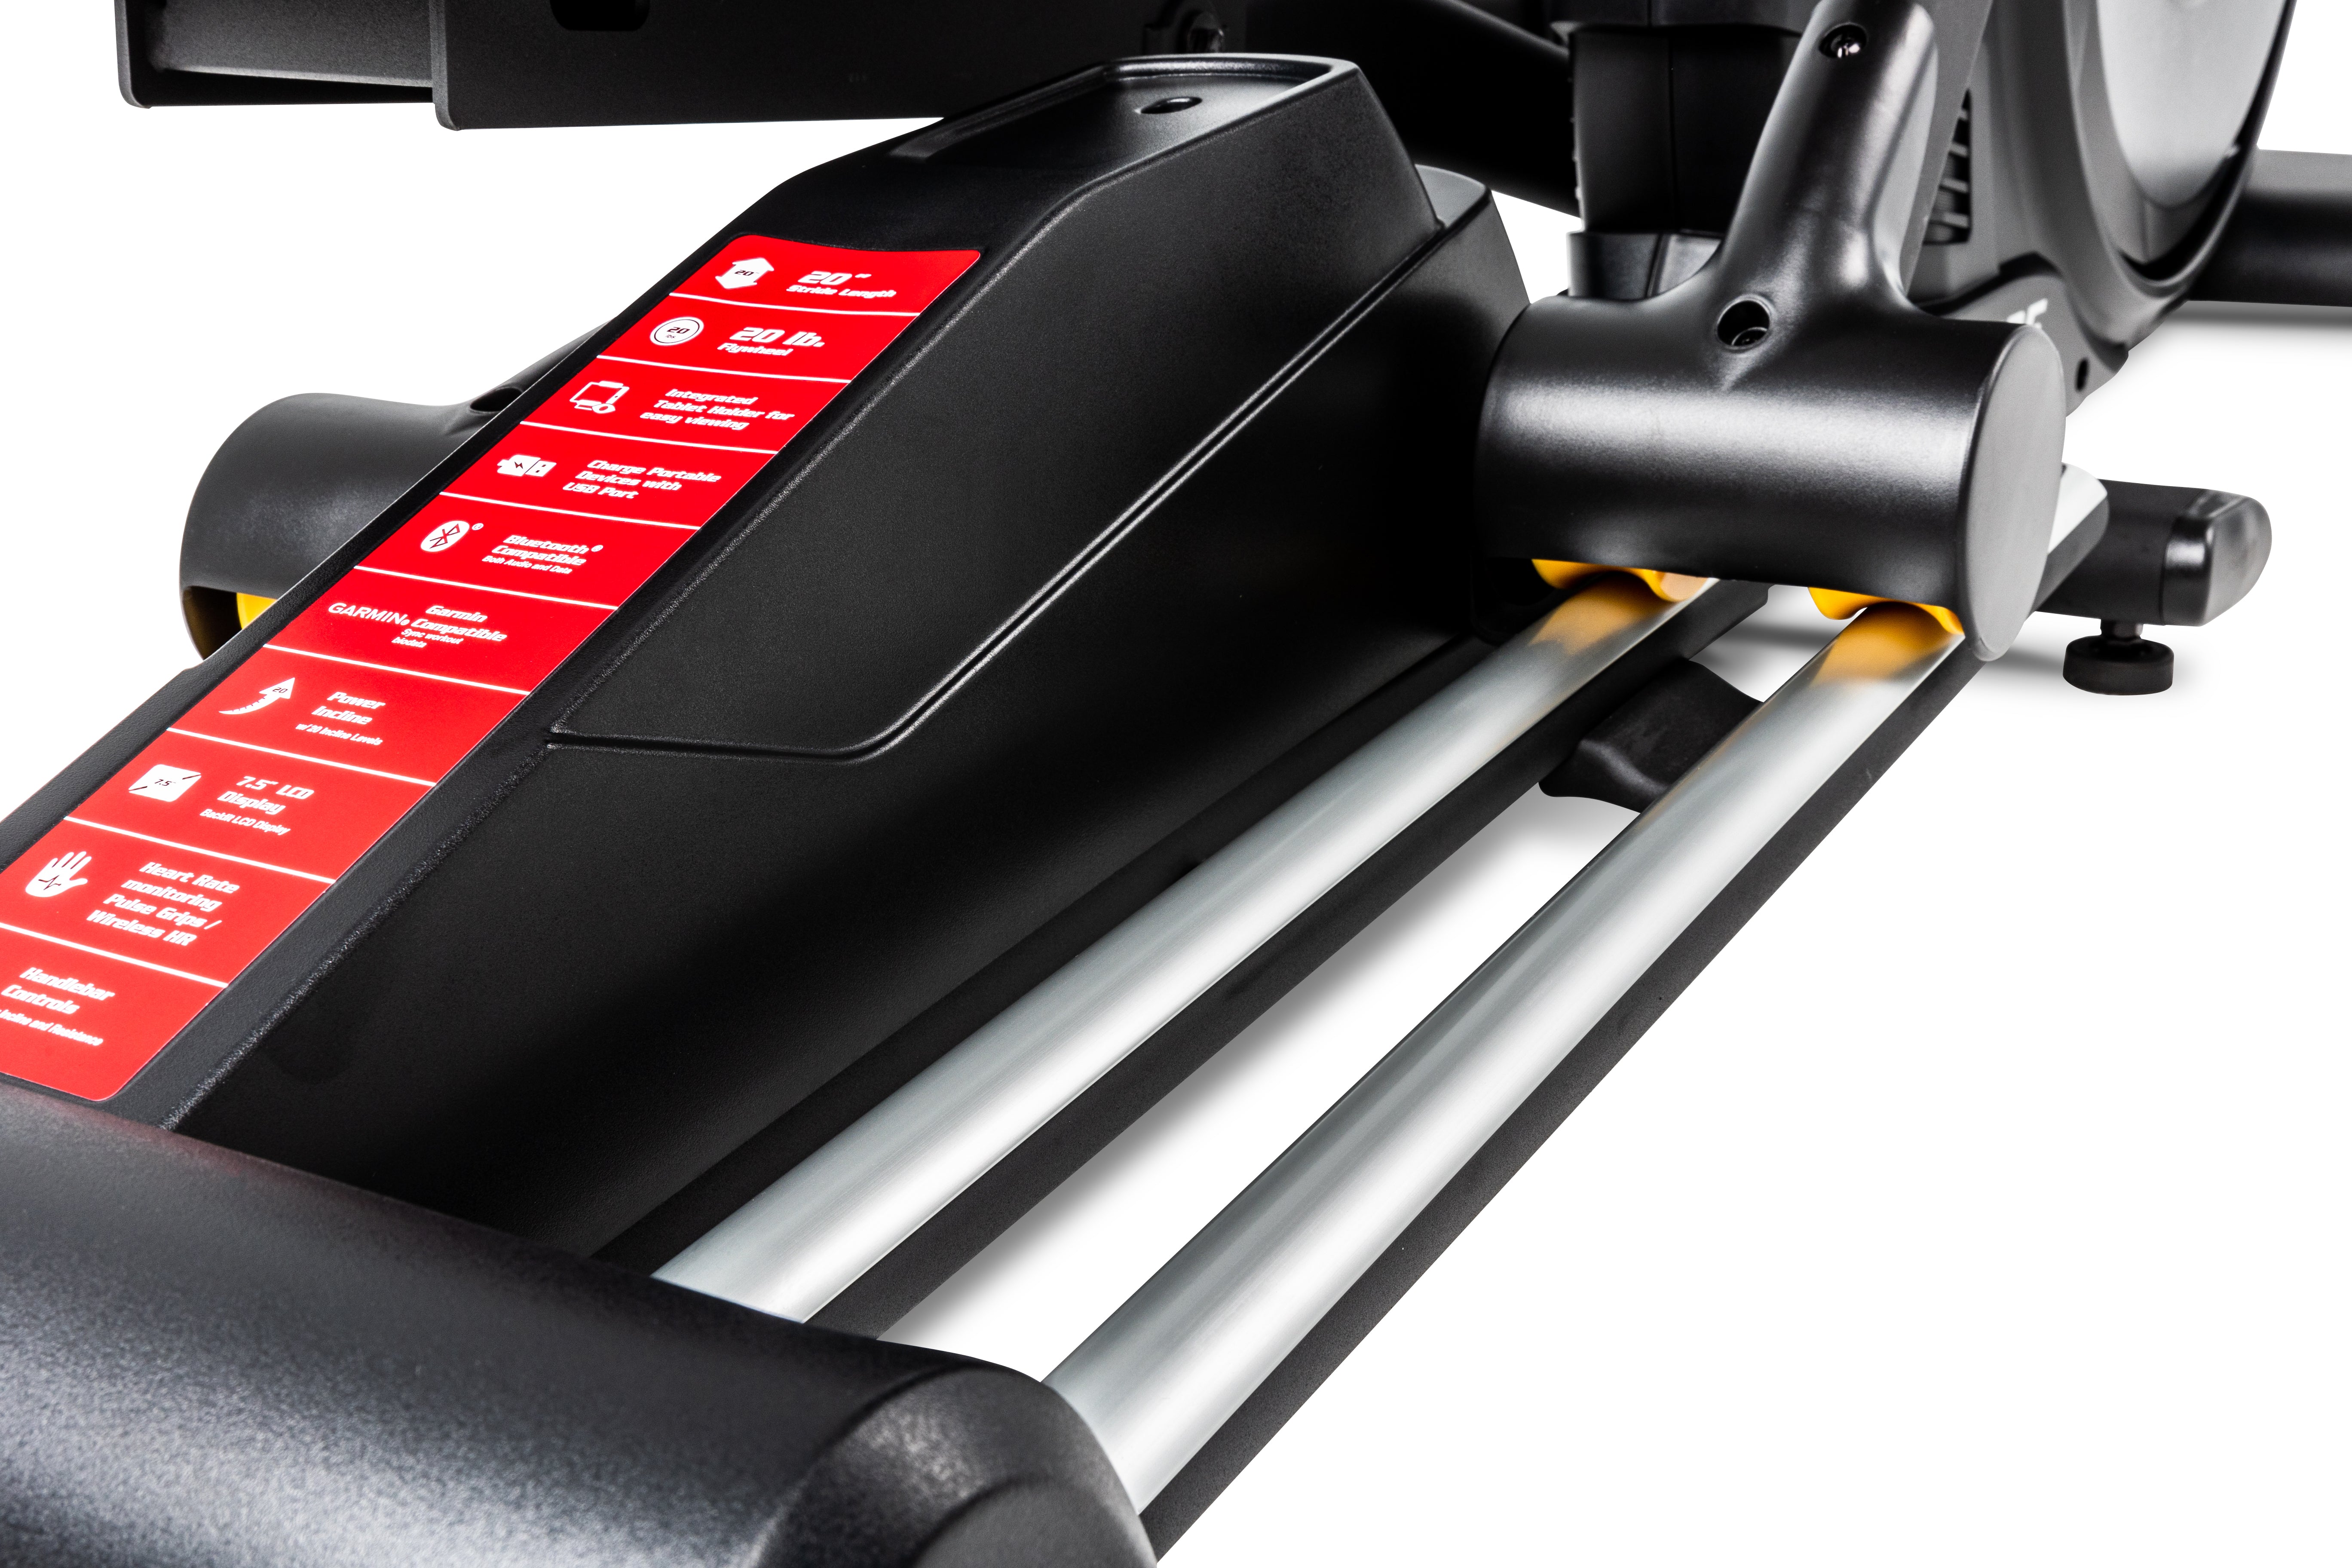 Close-up view of the Sole E25 elliptical machine, showcasing its control panel with red labeled buttons, black body, silver rails, and yellow accents on the joints.